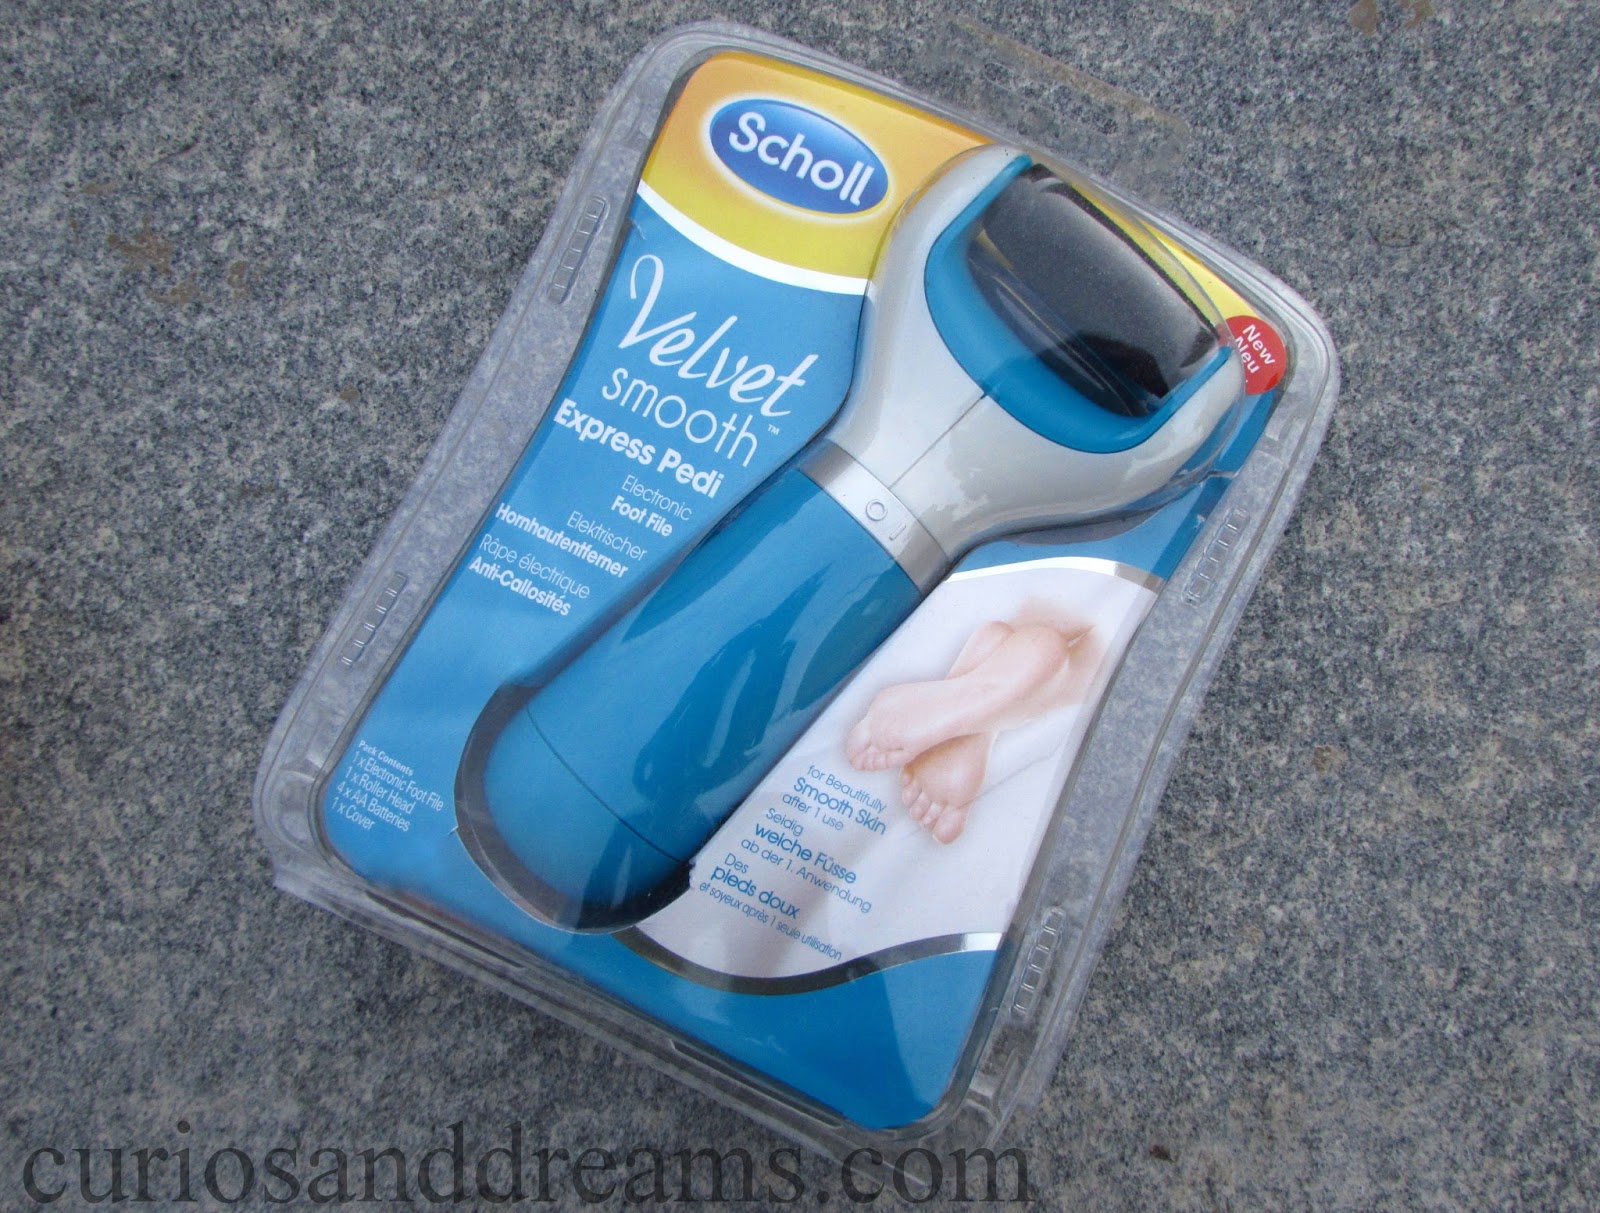 Voorverkoop Optimisme Pennenvriend Scholl Velvet Smooth Express Pedi Electronic Foot File : Review & Effects -  Curios and Dreams - Indian Skincare and Beauty